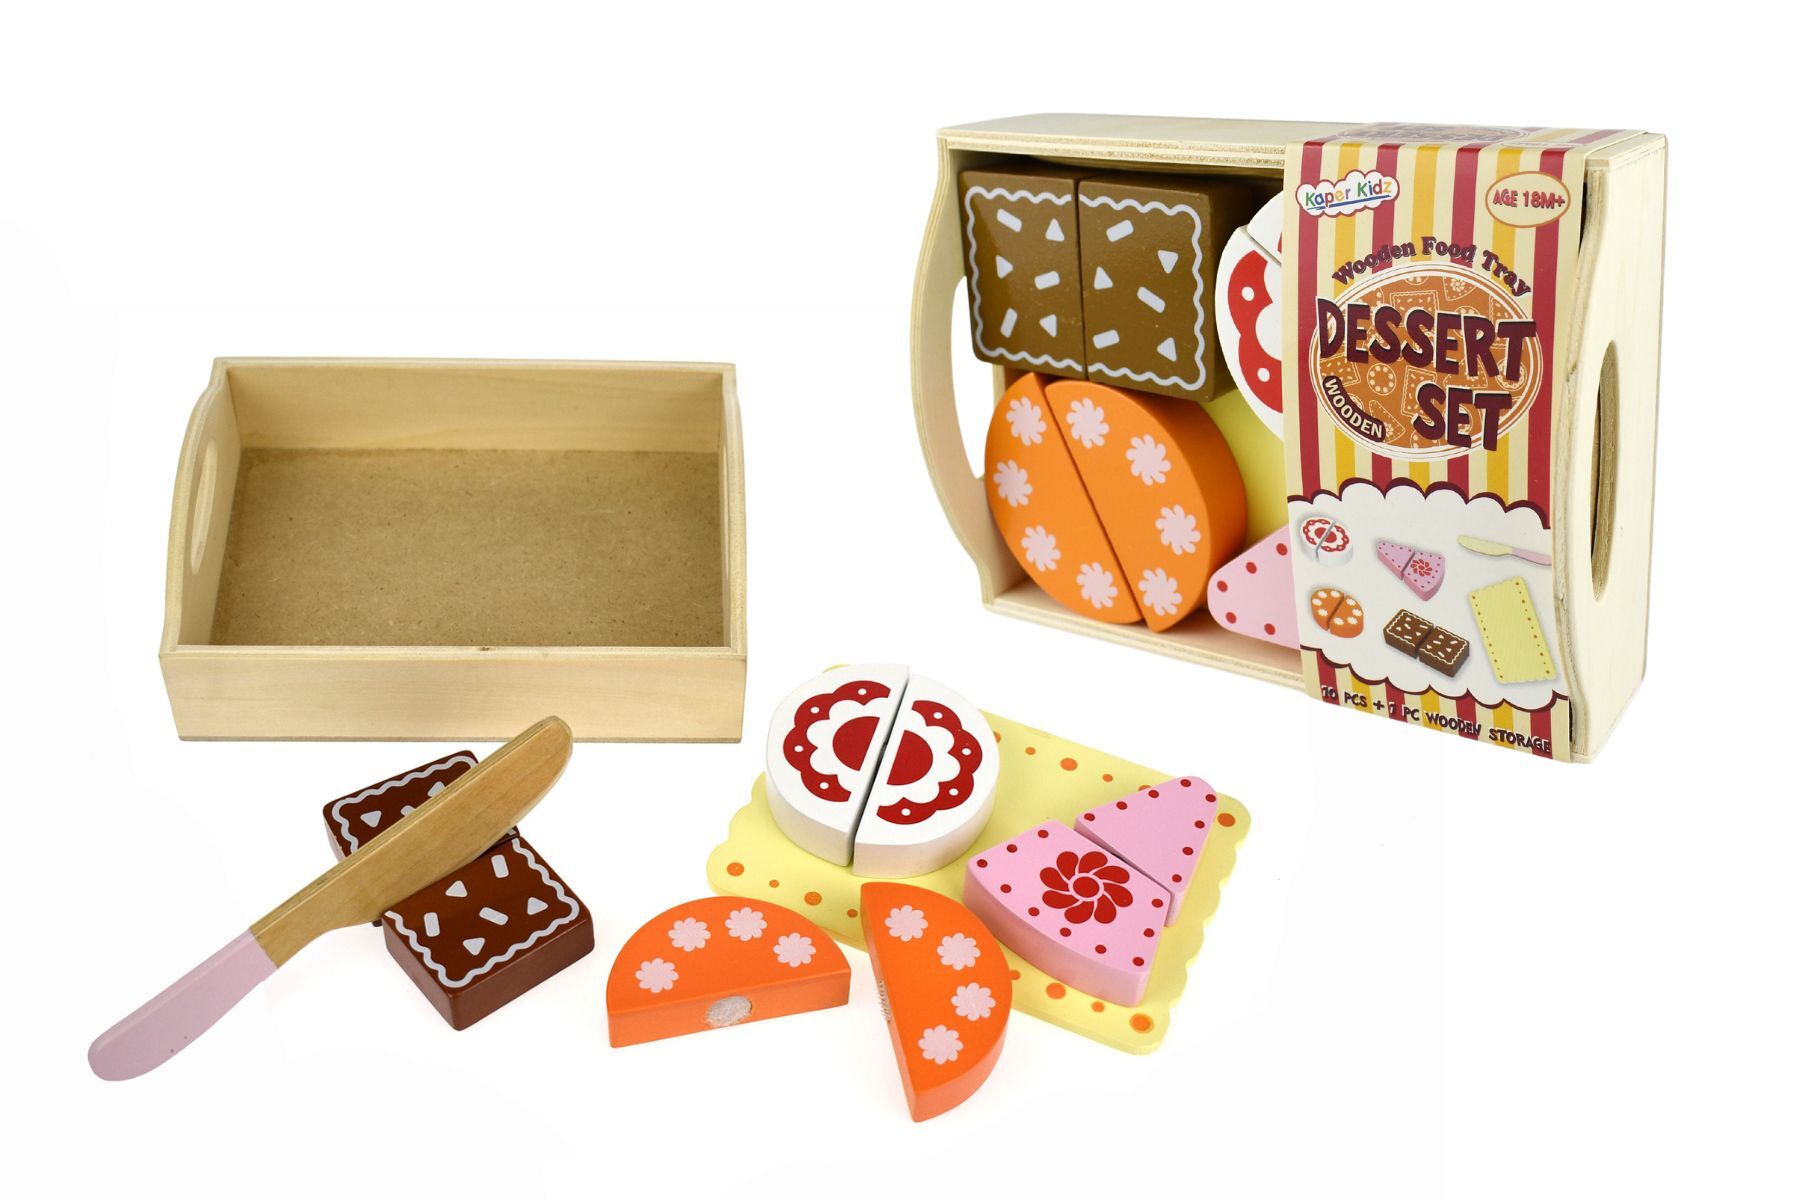 A wooden dessert set complete with a tray and a toy knift